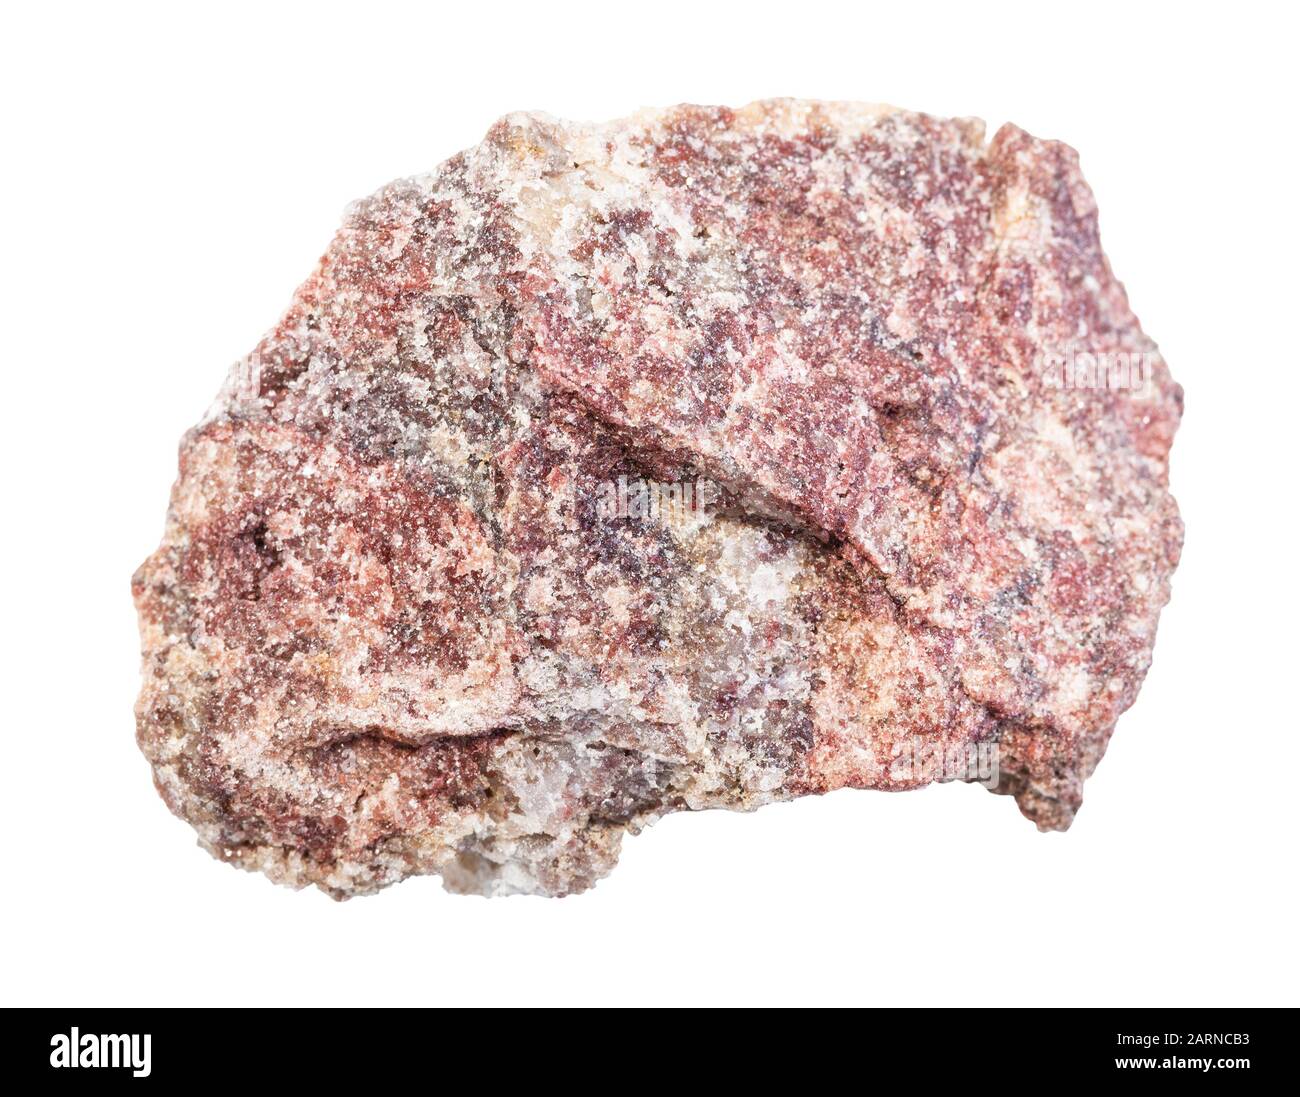 closeup of sample of natural mineral from geological collection - unpolished pink dolomite rock isolated on white background Stock Photo